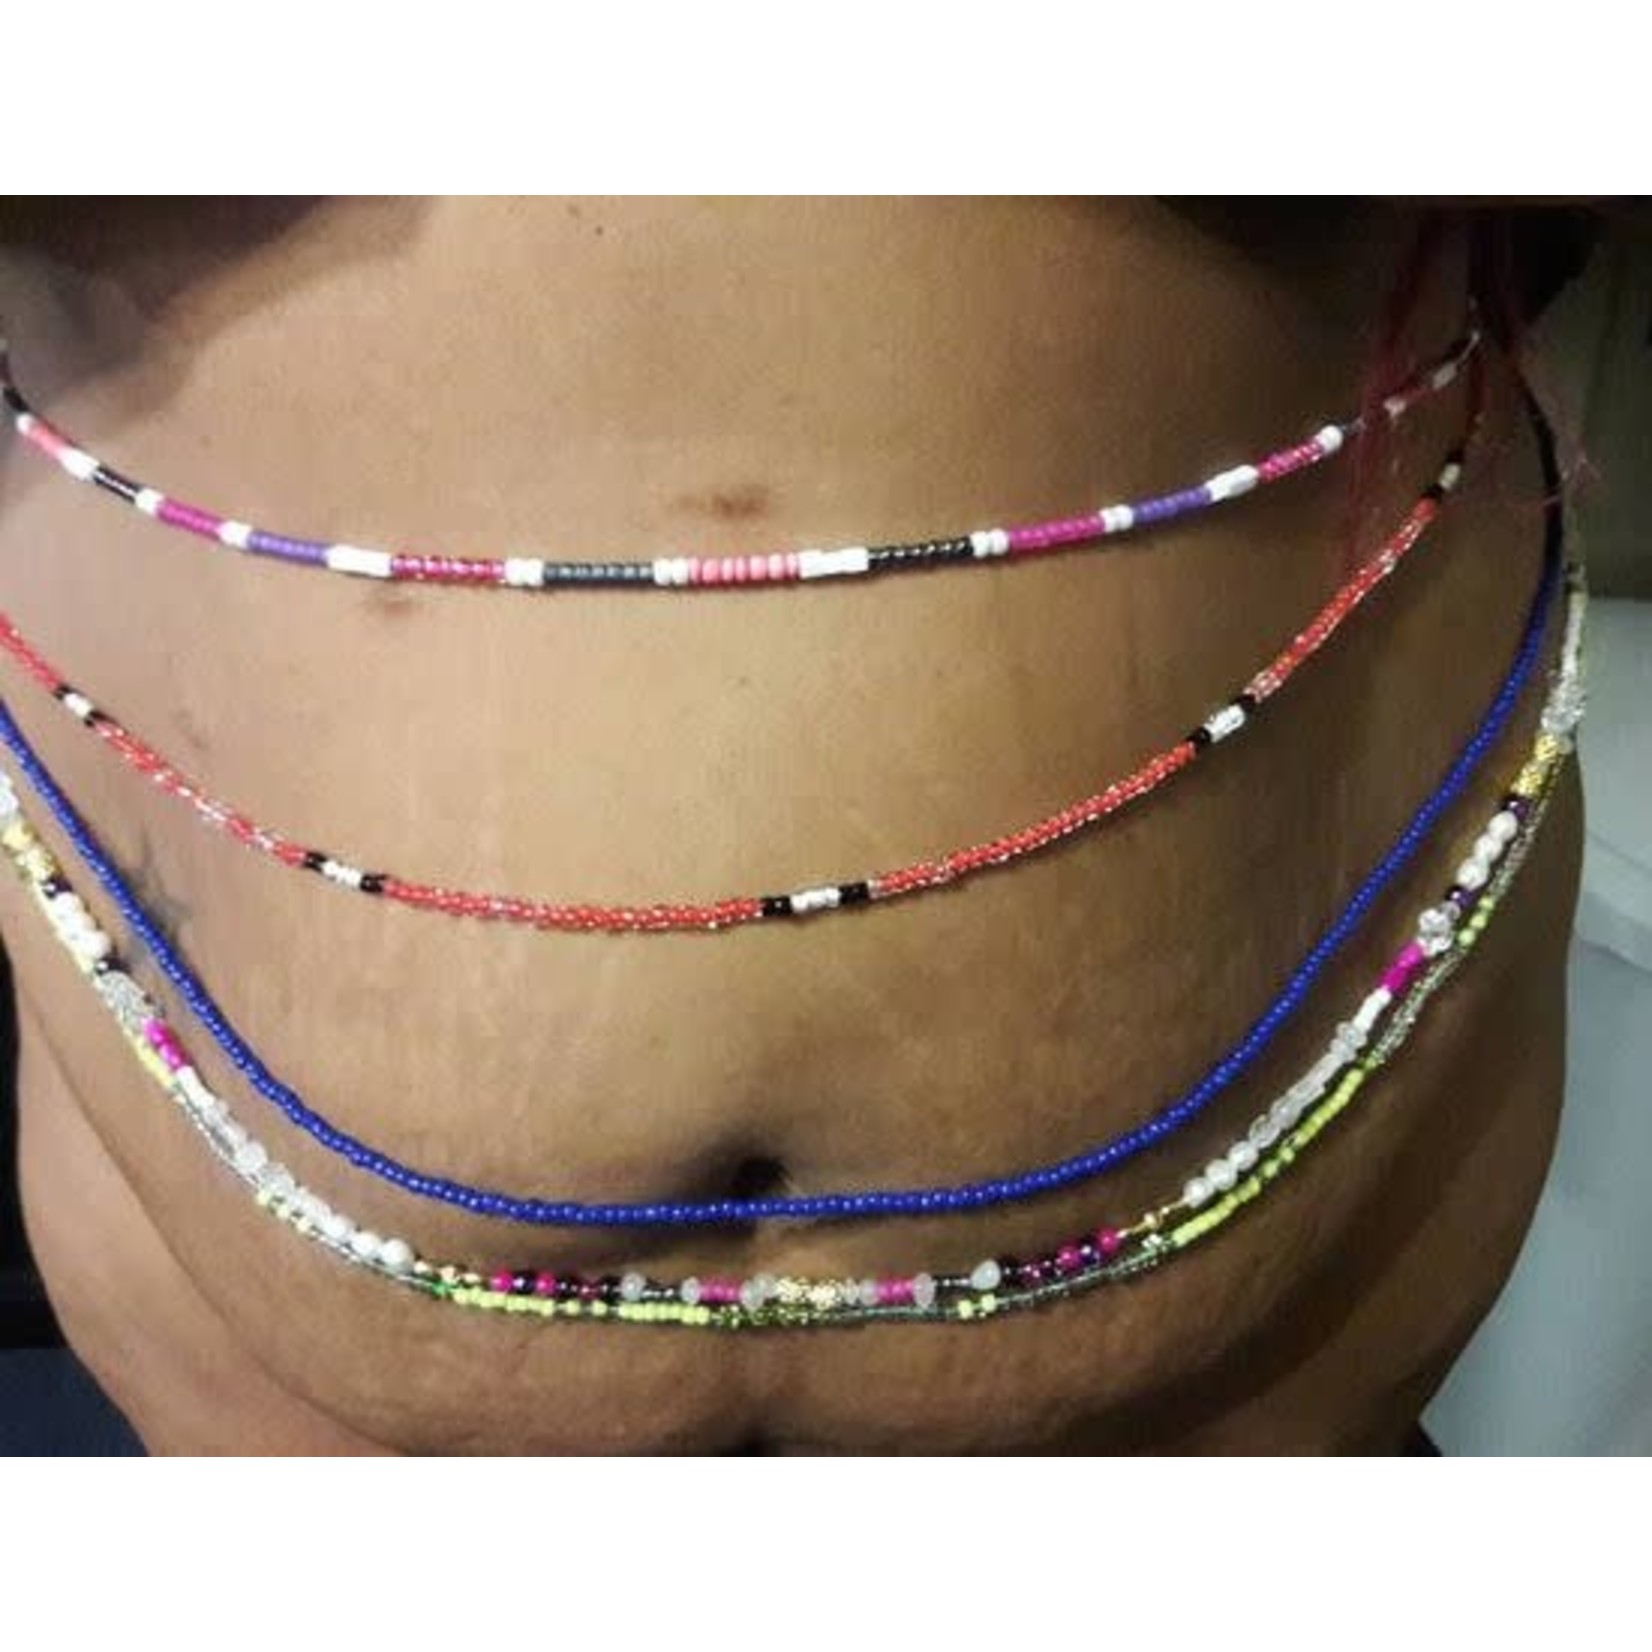 Waist / Belly Beads Plus Size